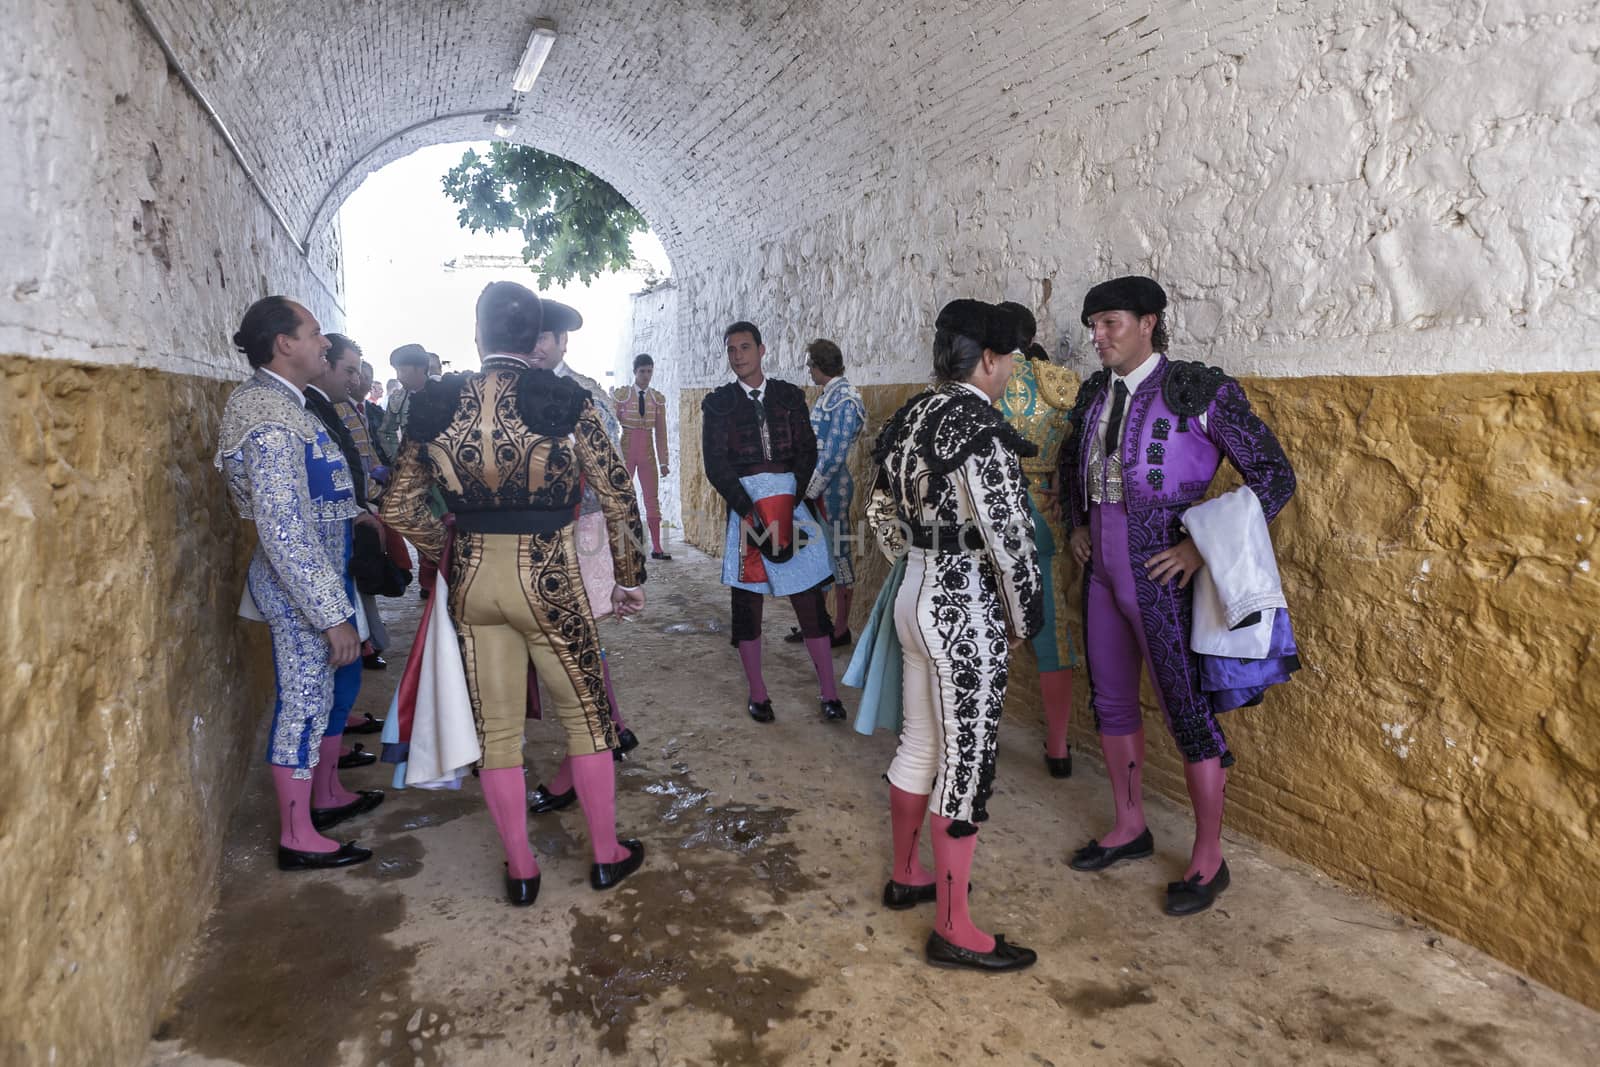 Andujar, Jaen province, SPAIN - 10 september 2011: Bullfighters speaking on the alley waiting to come out to the bullring, Andujar, Jaen province, Andalusia, Spain